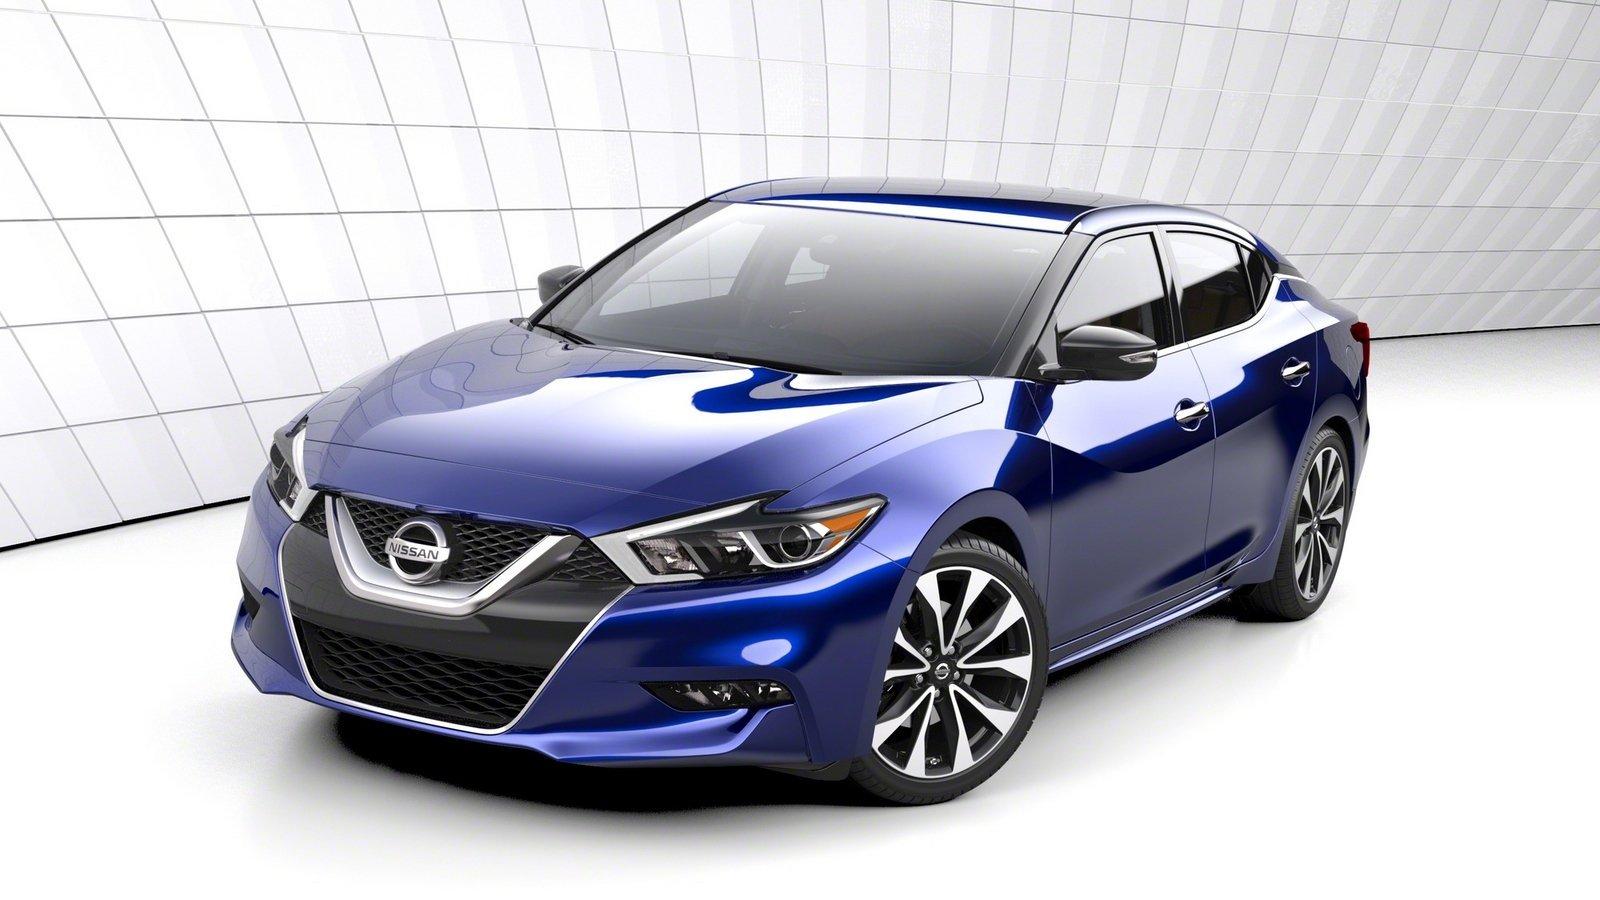 2017 Nissan Maxima Picture, Photo, Wallpaper And Videos